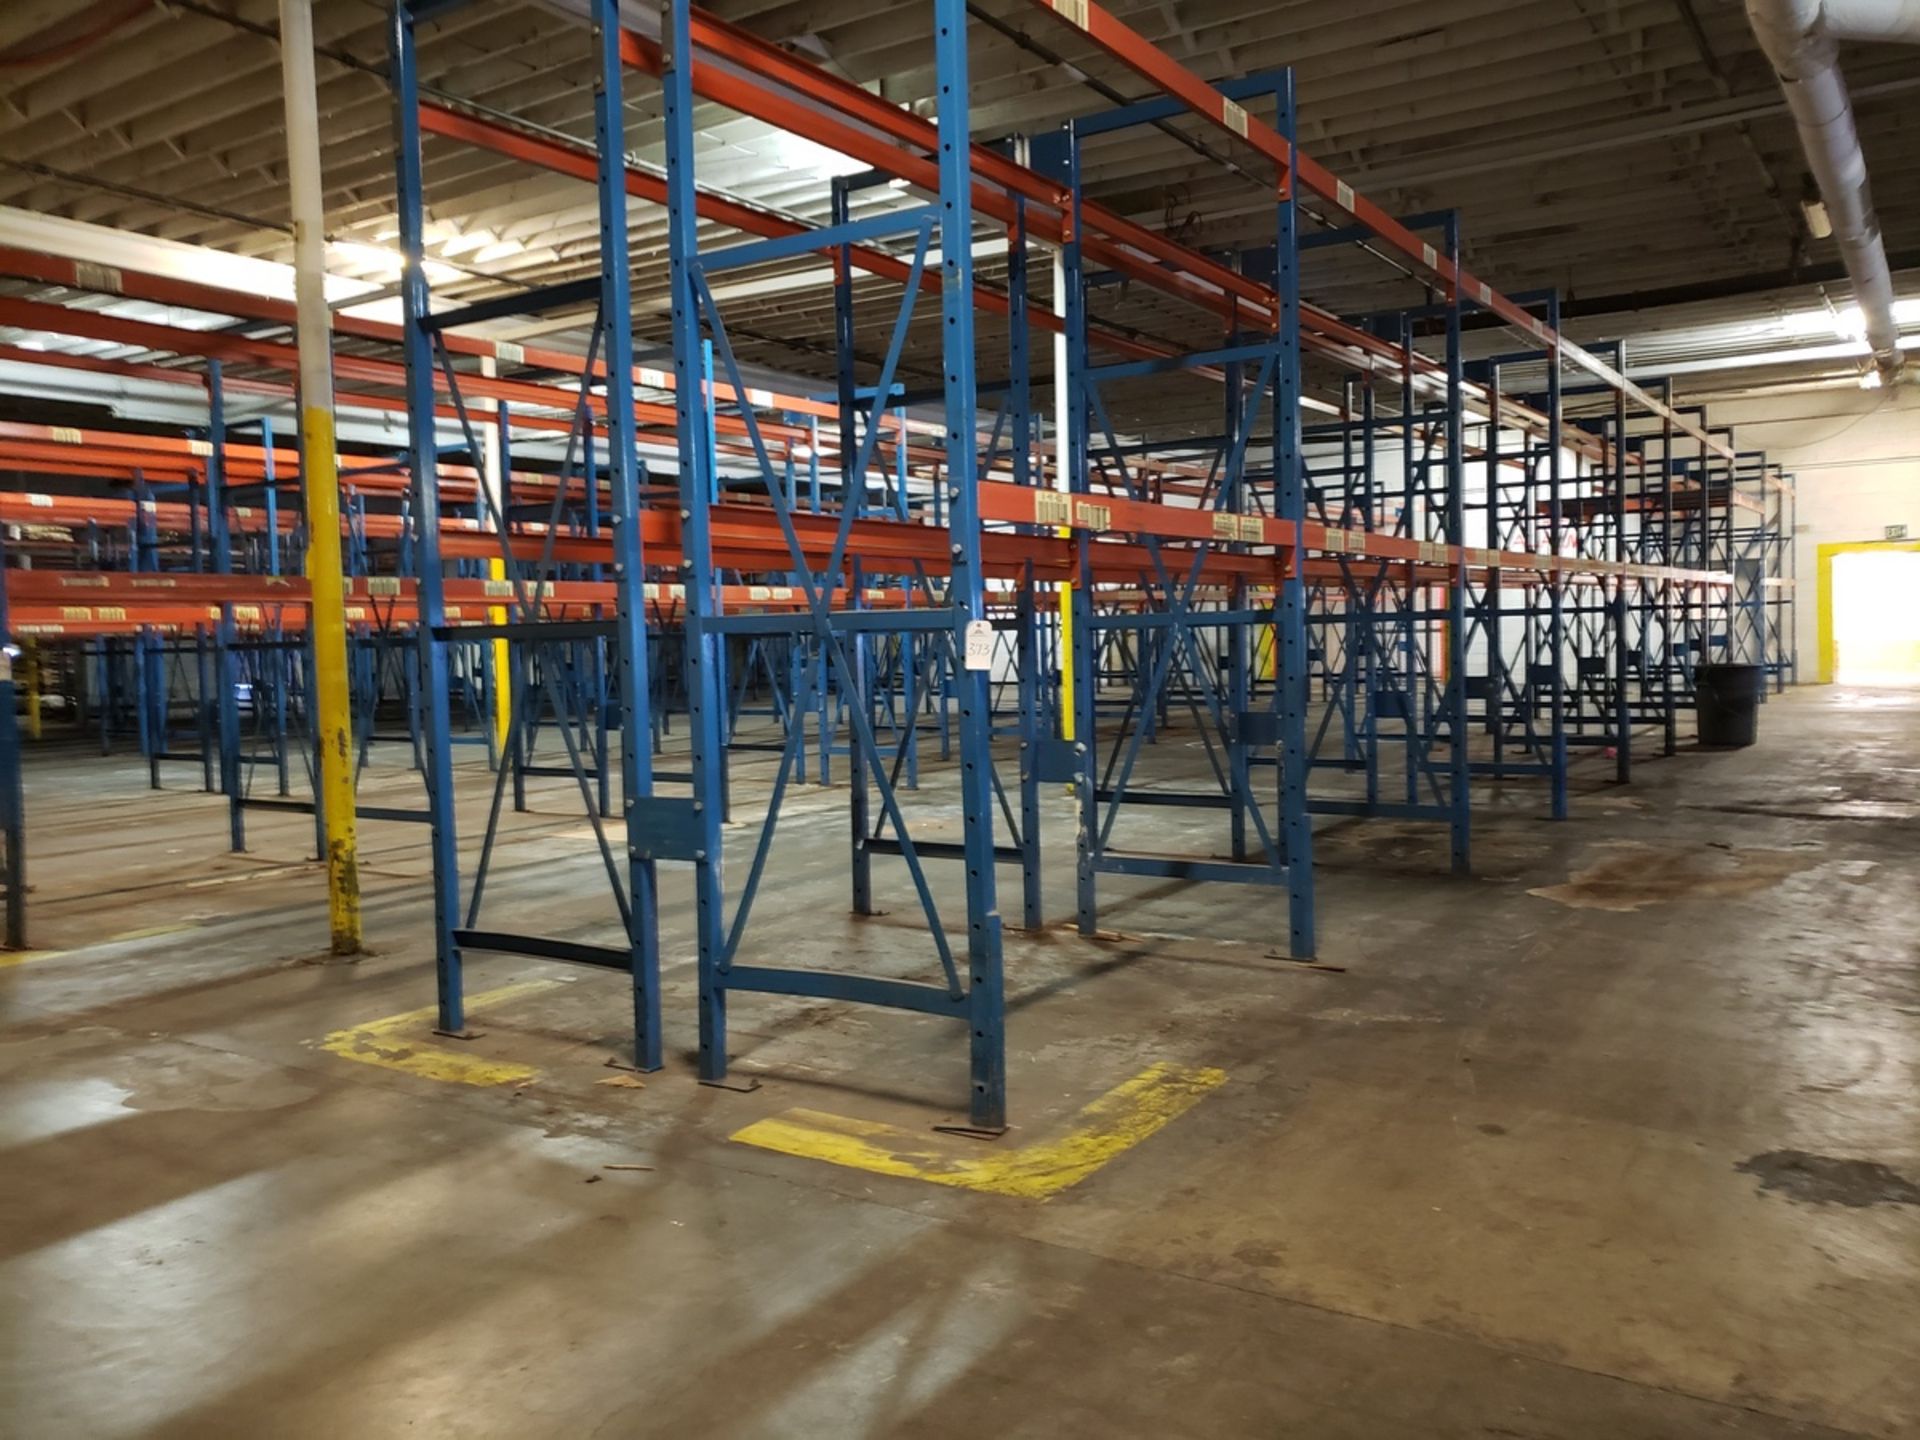 Lot of Pallet Racking, (22) 42" x 12' Uprights, (76) 8' Beams | Rig Fee: $2500